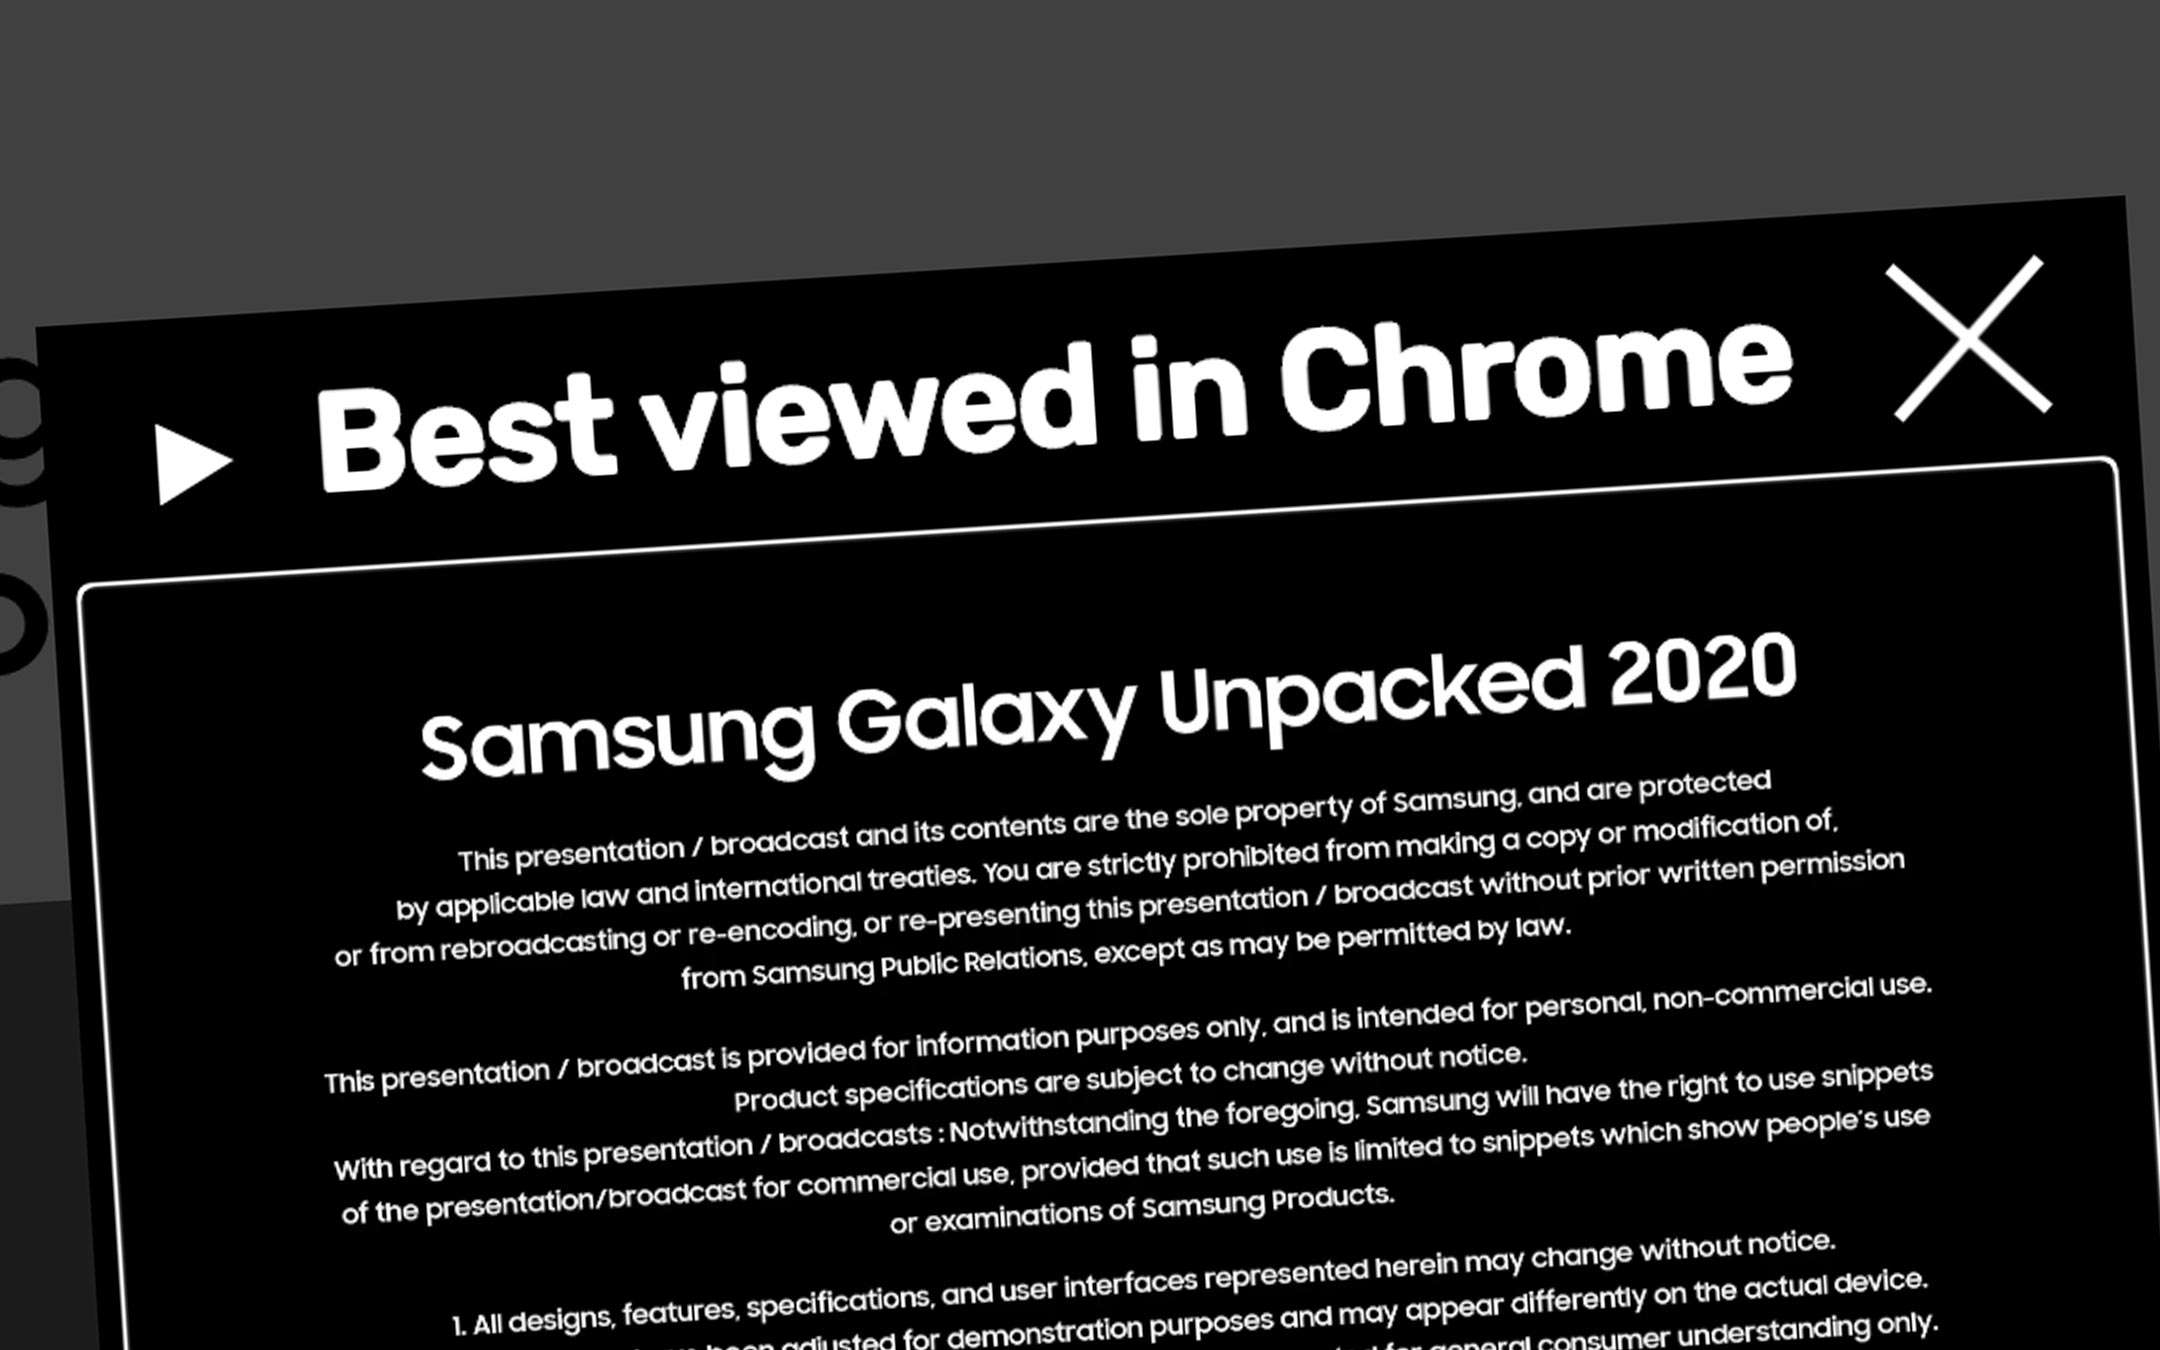 Galaxy Unpacked: better with Google Chrome